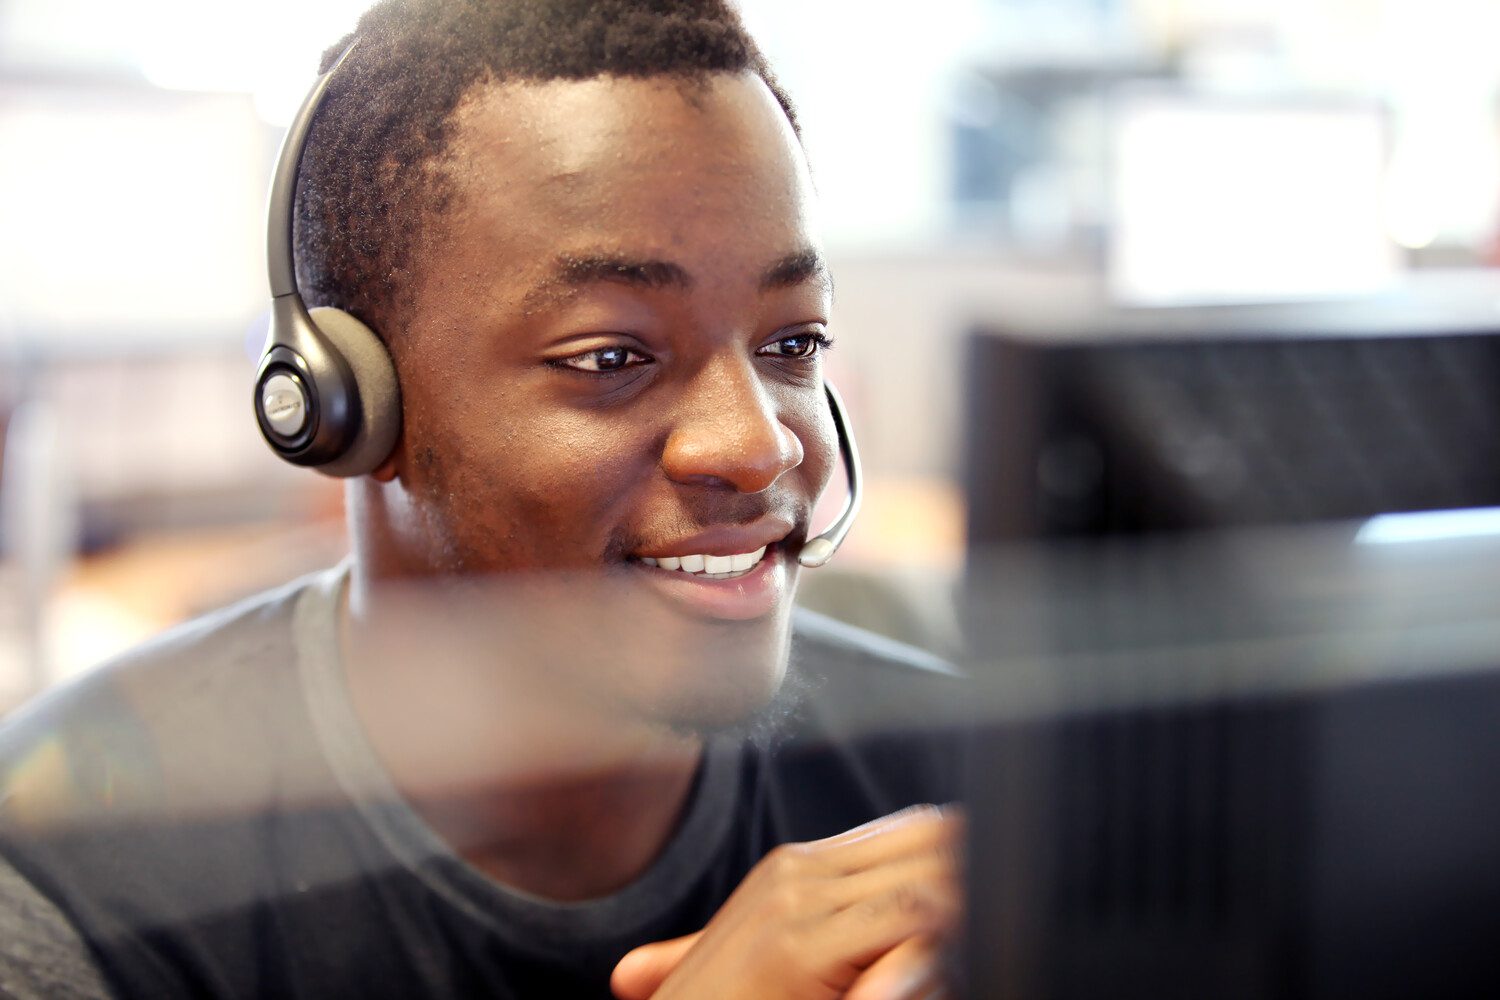 Contact center agent wearing a headset and helping a customer